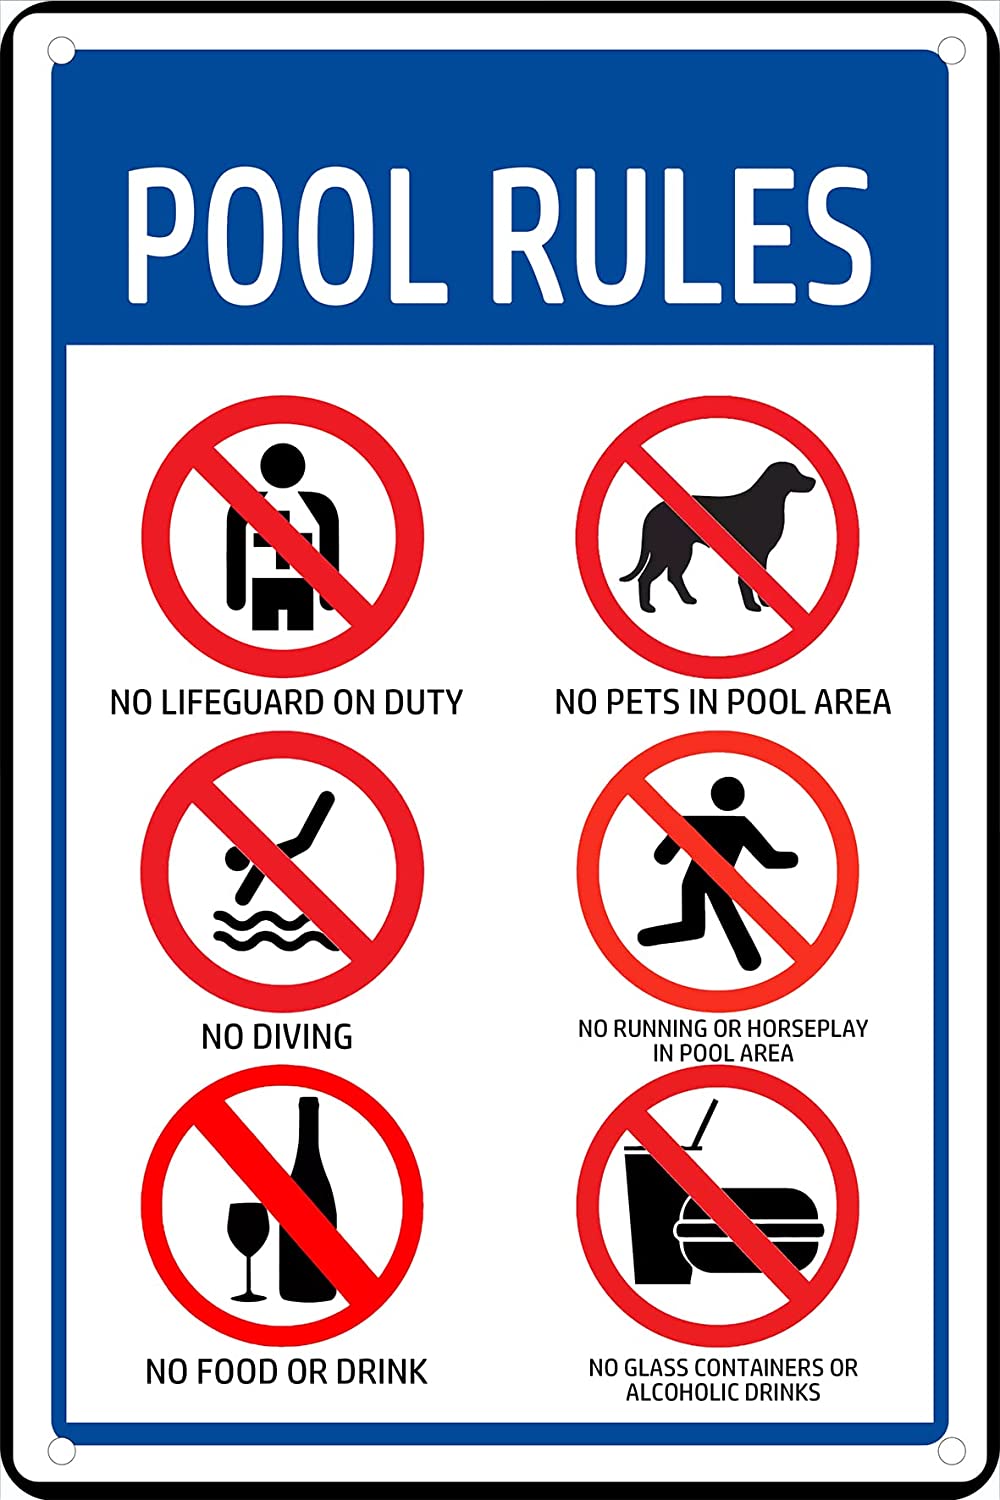 Swimming Pool Water Park Safety tin Sign 12x8 Vintage Signs Metal Plates Funny Art nobrand Wall Decor Personalized Swimming Pool Rules with Their own Risk Swimming Warning Metal Sign 